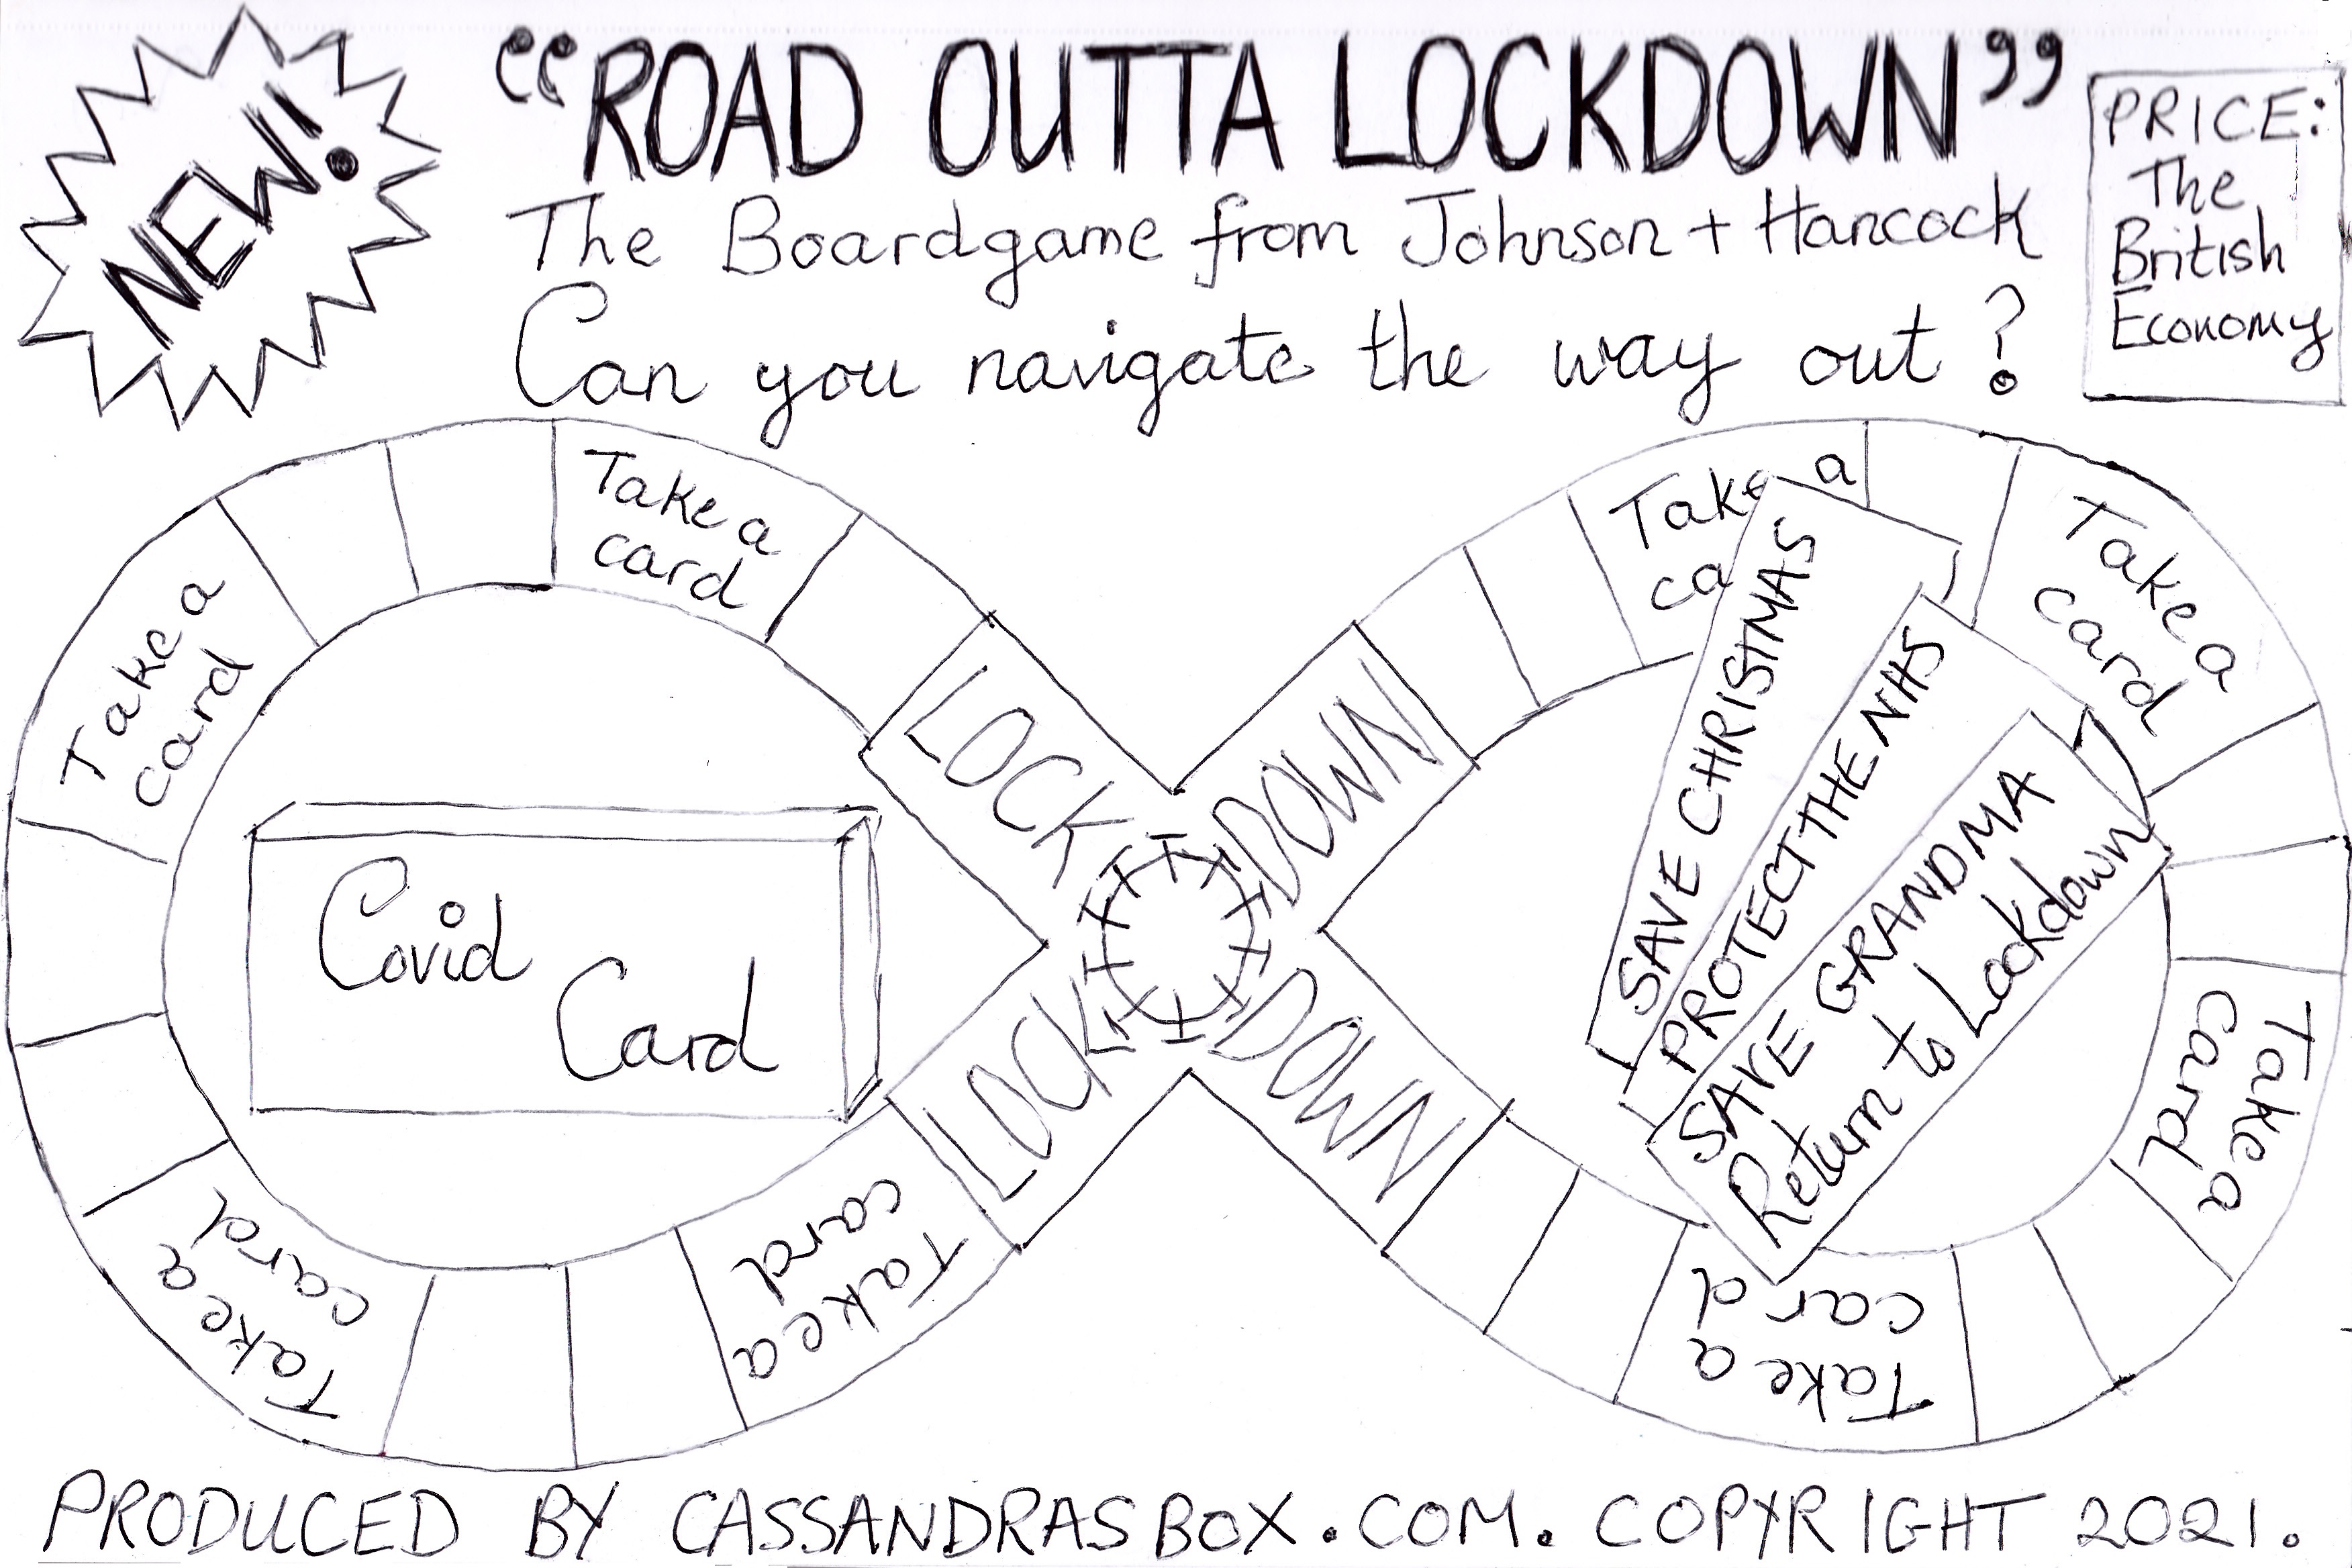 Cartoon depicting a fictional board game advert for 'Road Outta Lockdown. The board game from Johnson and Hancock, Can you navigate the way out?" New, Price the British Economy. Board is a infinity symbol shape.